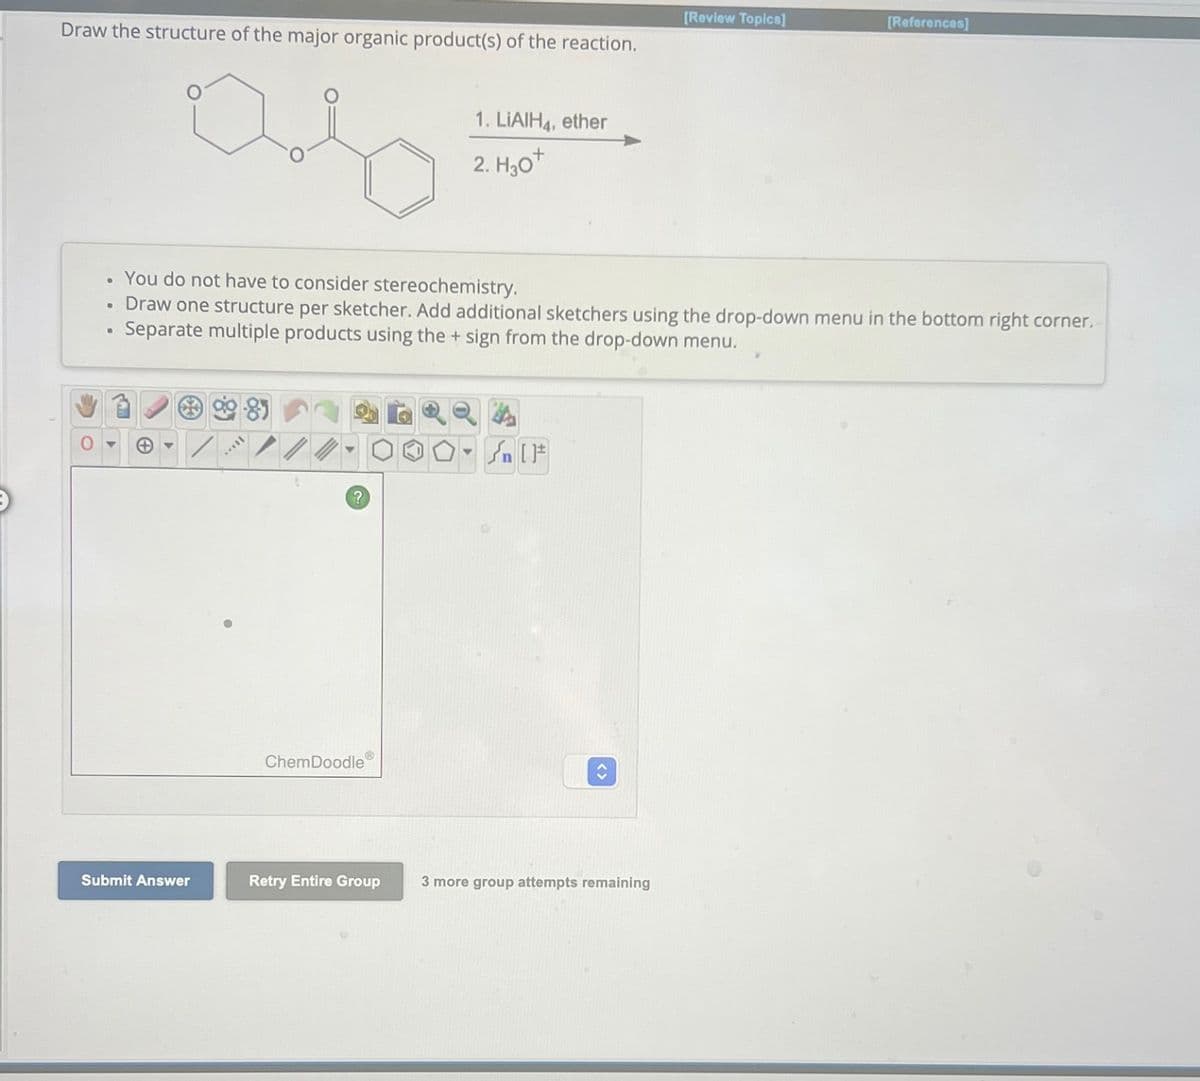 Draw the structure of the major organic product(s) of the reaction.
ara
Submit Answer
I...
.
You do not have to consider stereochemistry.
• Draw one structure per sketcher. Add additional sketchers using the drop-down menu in the bottom right corner.
Separate multiple products using the + sign from the drop-down menu.
?
ChemDoodle
1. LIAIH4, ether
2. H₂O+
Retry Entire Group
▼
<>
[Review Topics]
3 more group attempts remaining
[References]